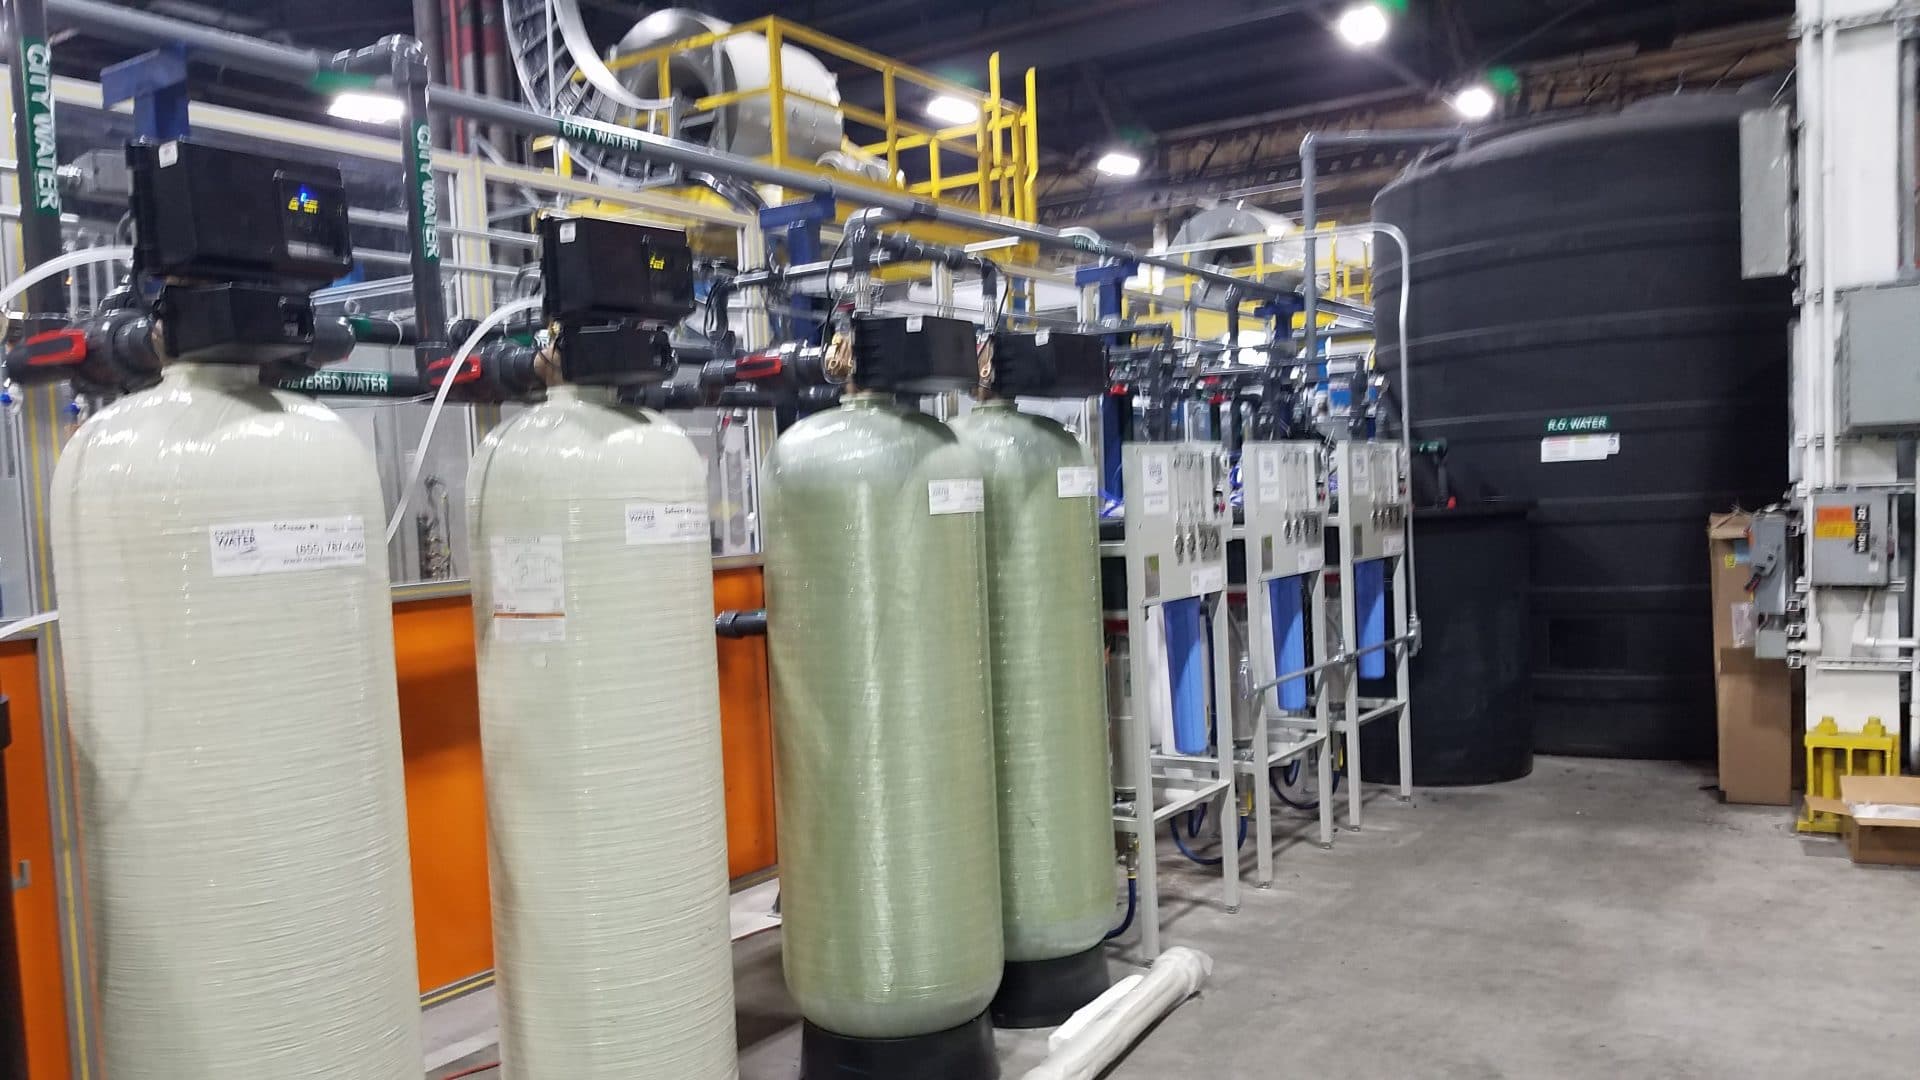 advantages of ro water in finishing systems, ro water for rinsing, ro water for washing